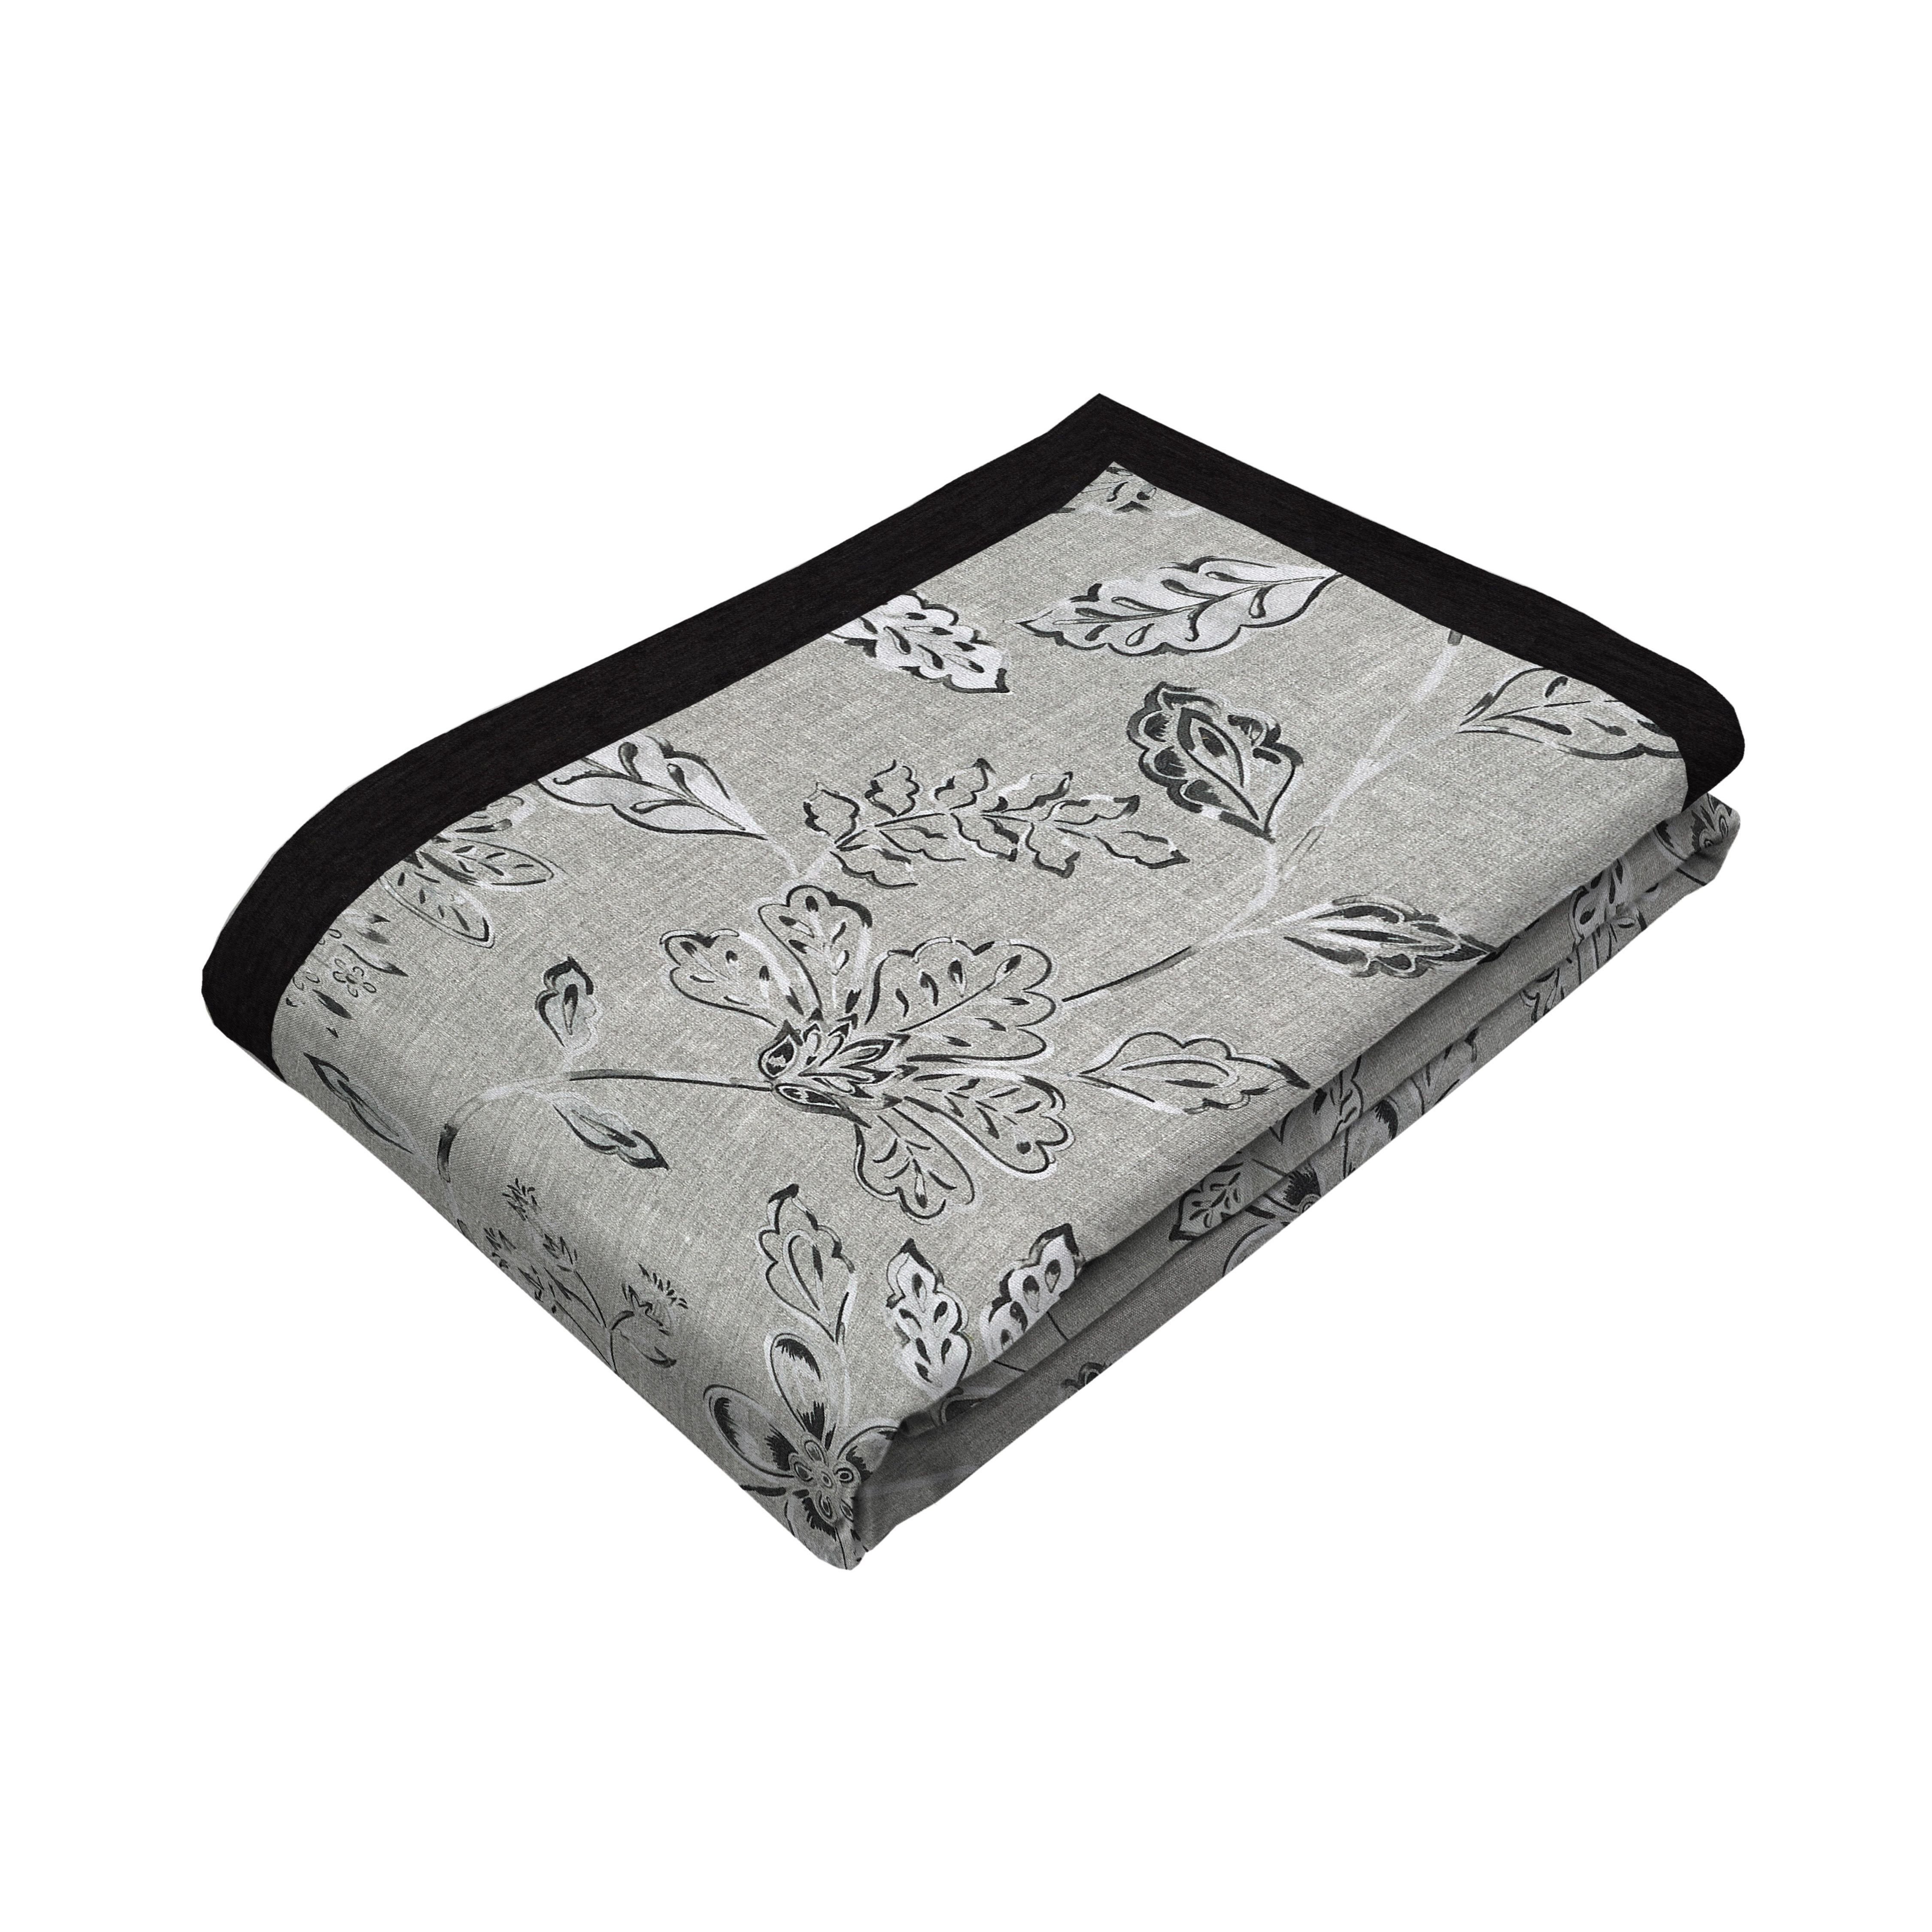 Eden Charcoal Grey Printed Throws and Runners, Bed Runner (50cm x 220cm)